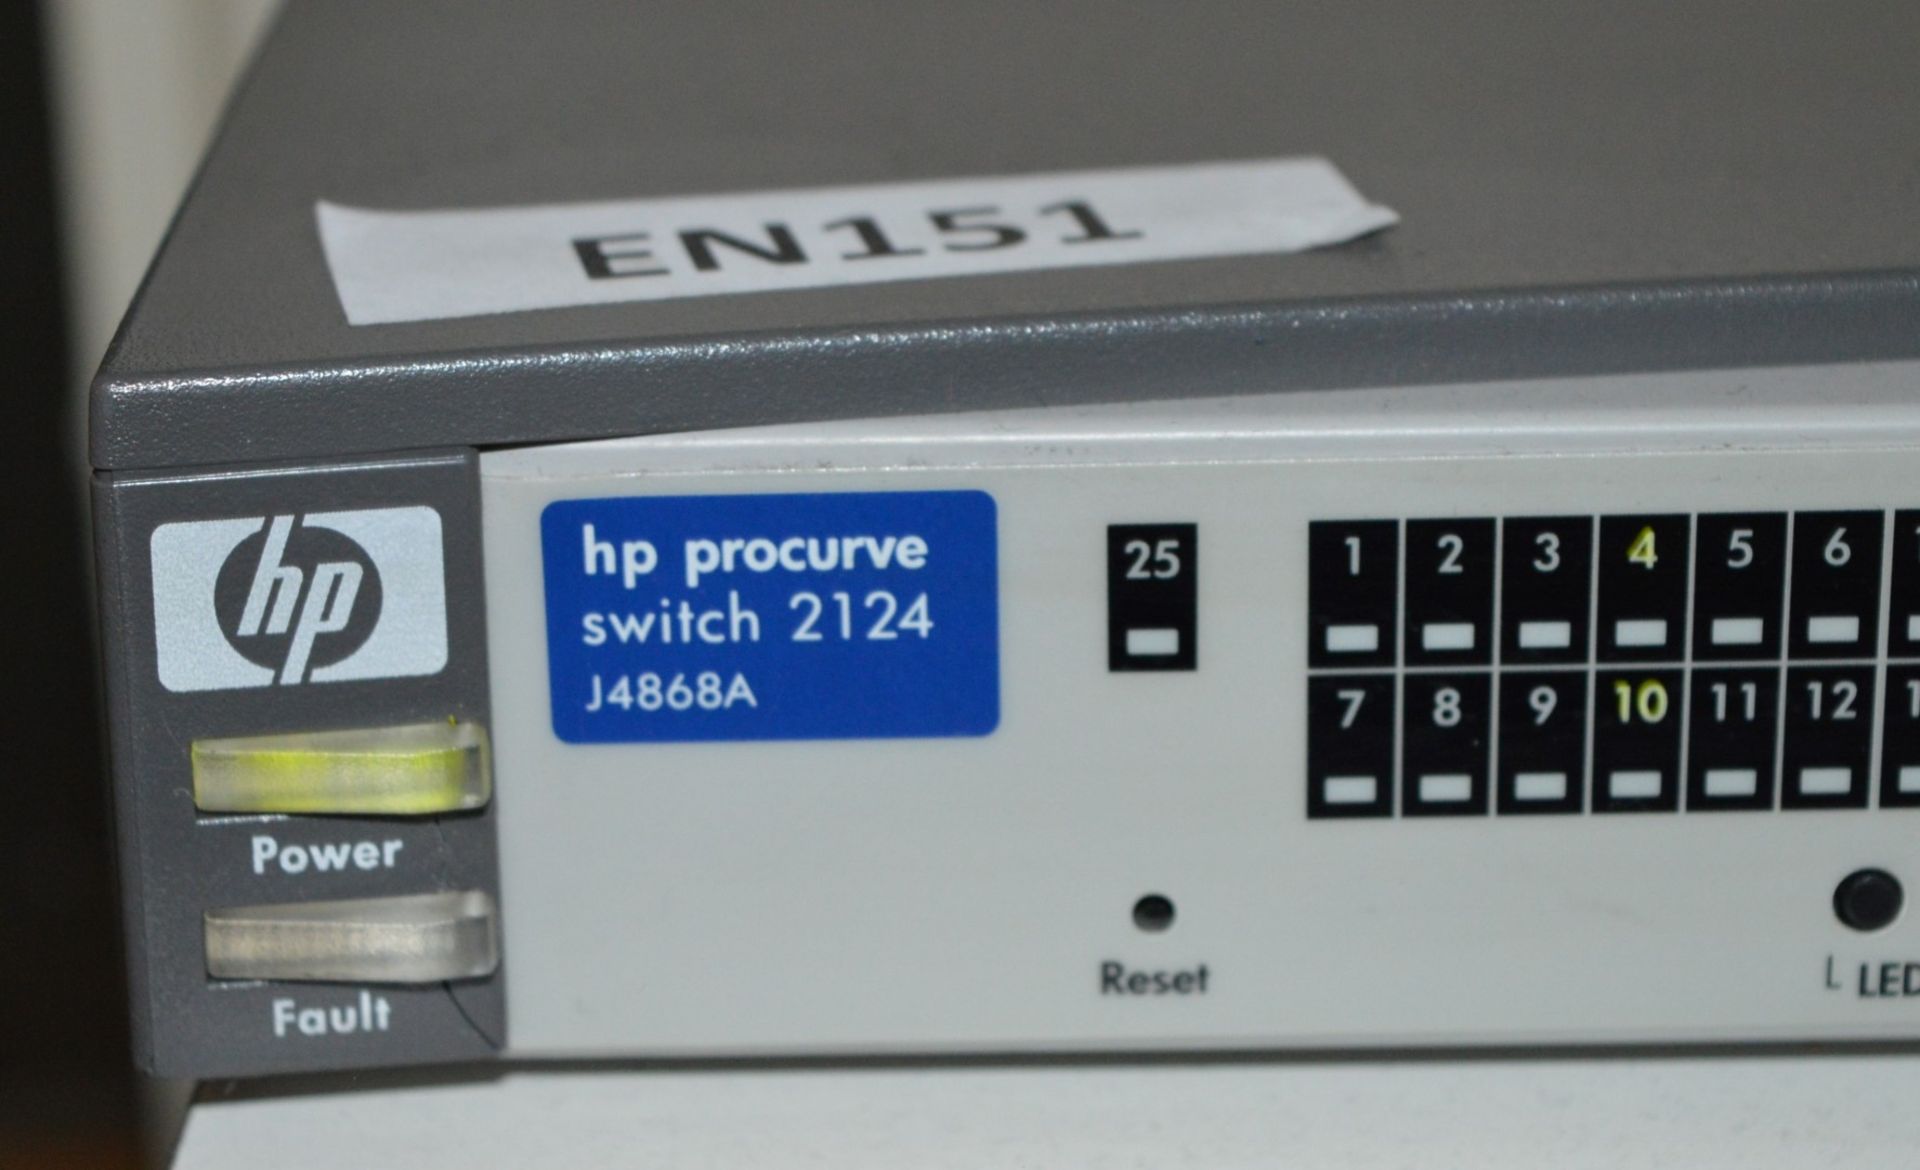 HP J4868A V2124 24 Port Unmanaged 10/100 Rackmount Switch - Image 2 of 2